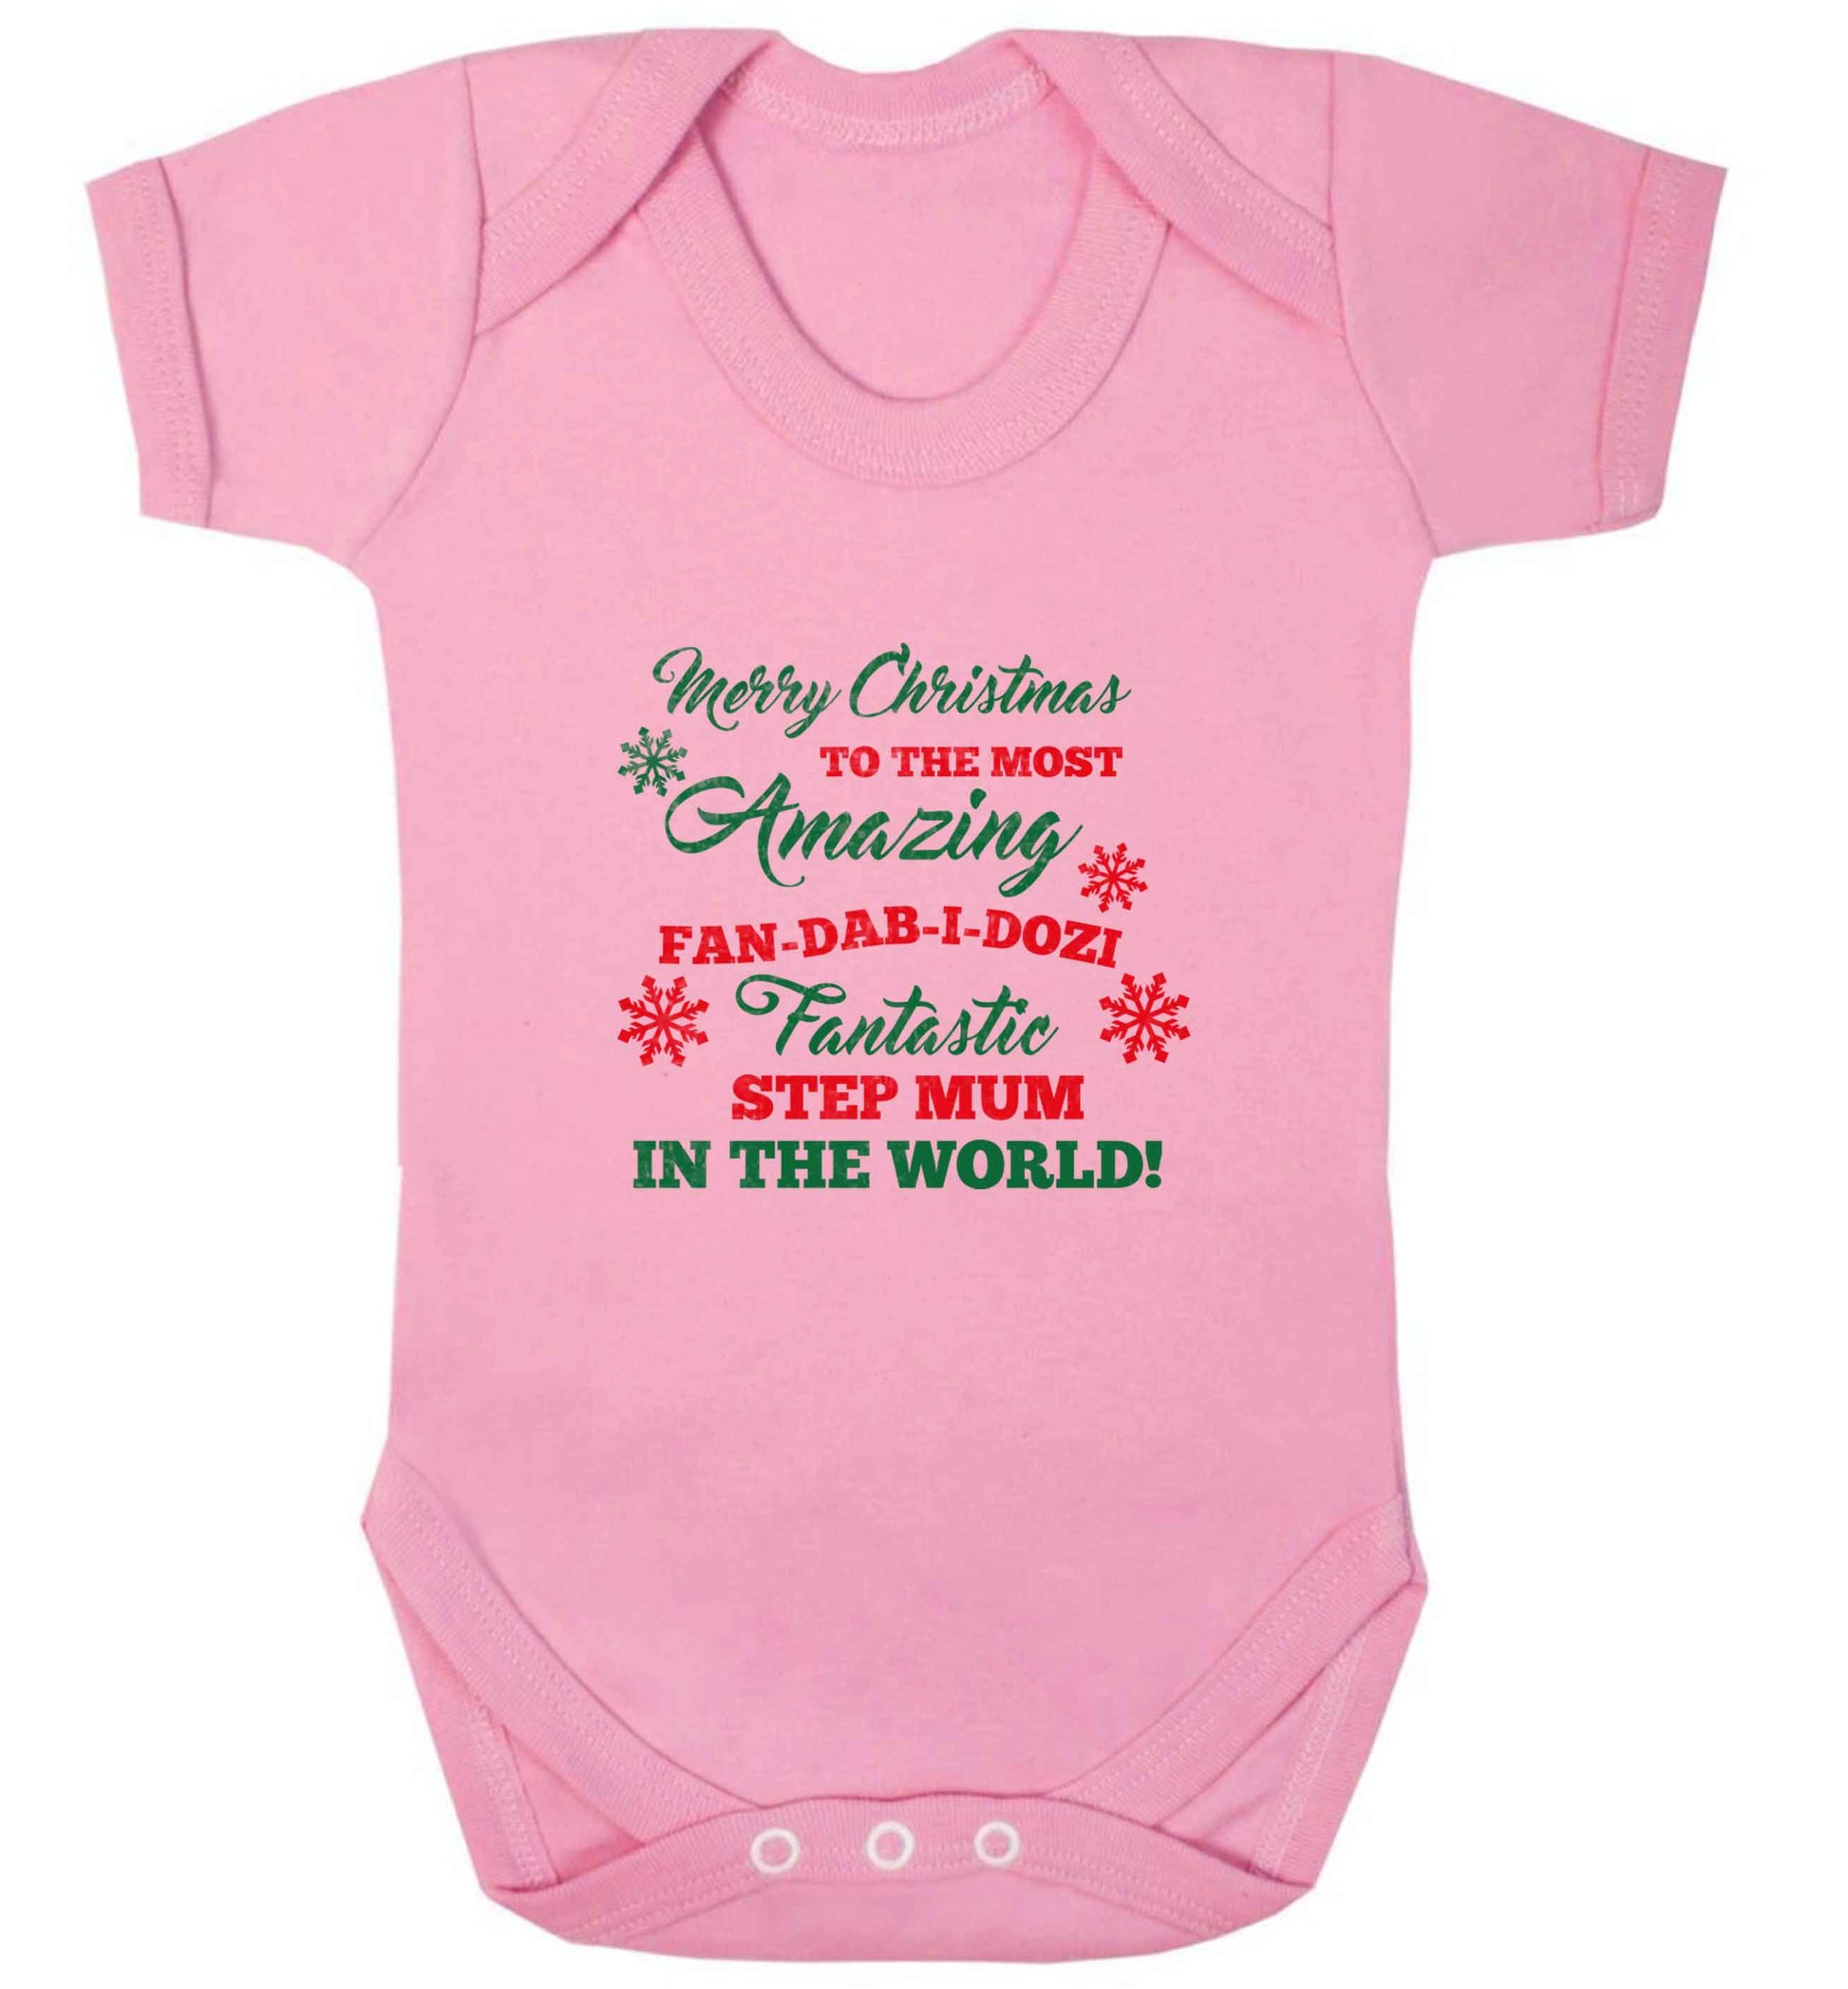 Merry Christmas to the most amazing fan-dab-i-dozi fantasic Step Mum in the world baby vest pale pink 18-24 months